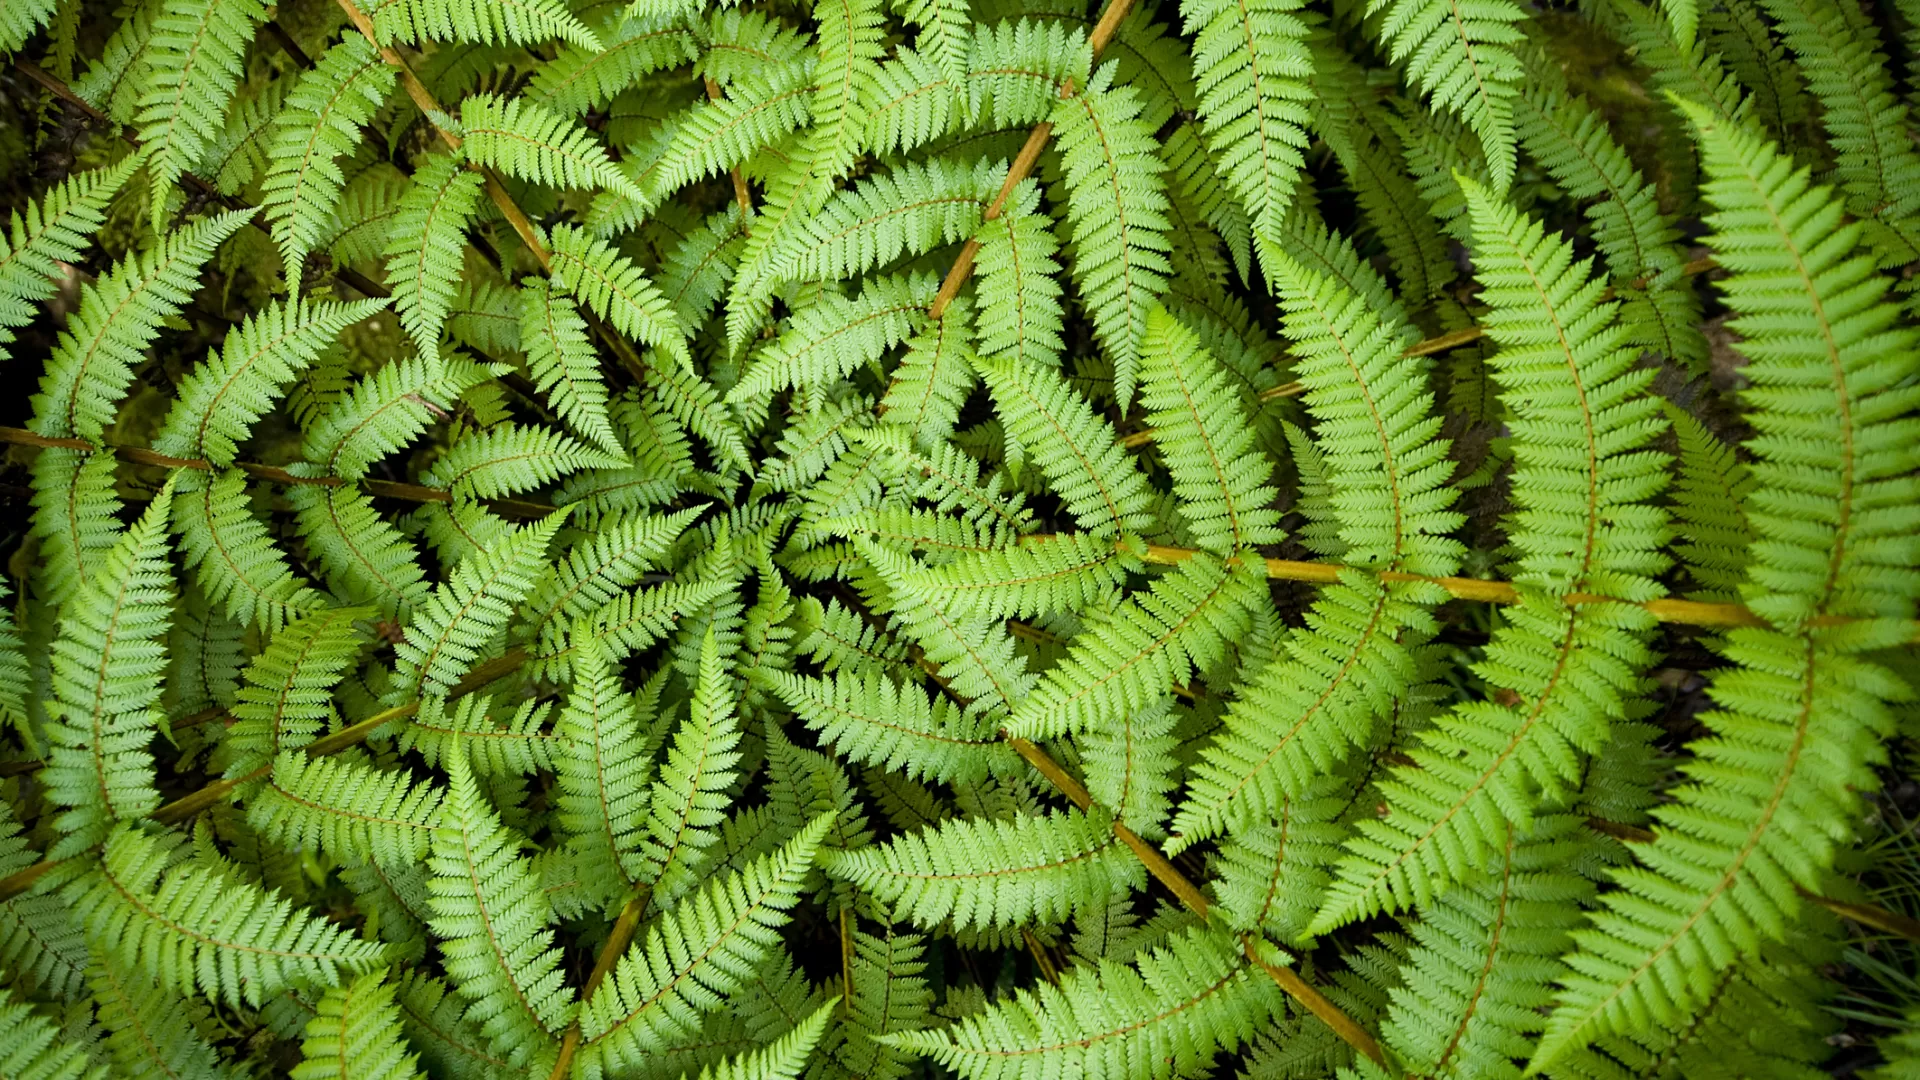 An upclose photo of a fern plant.